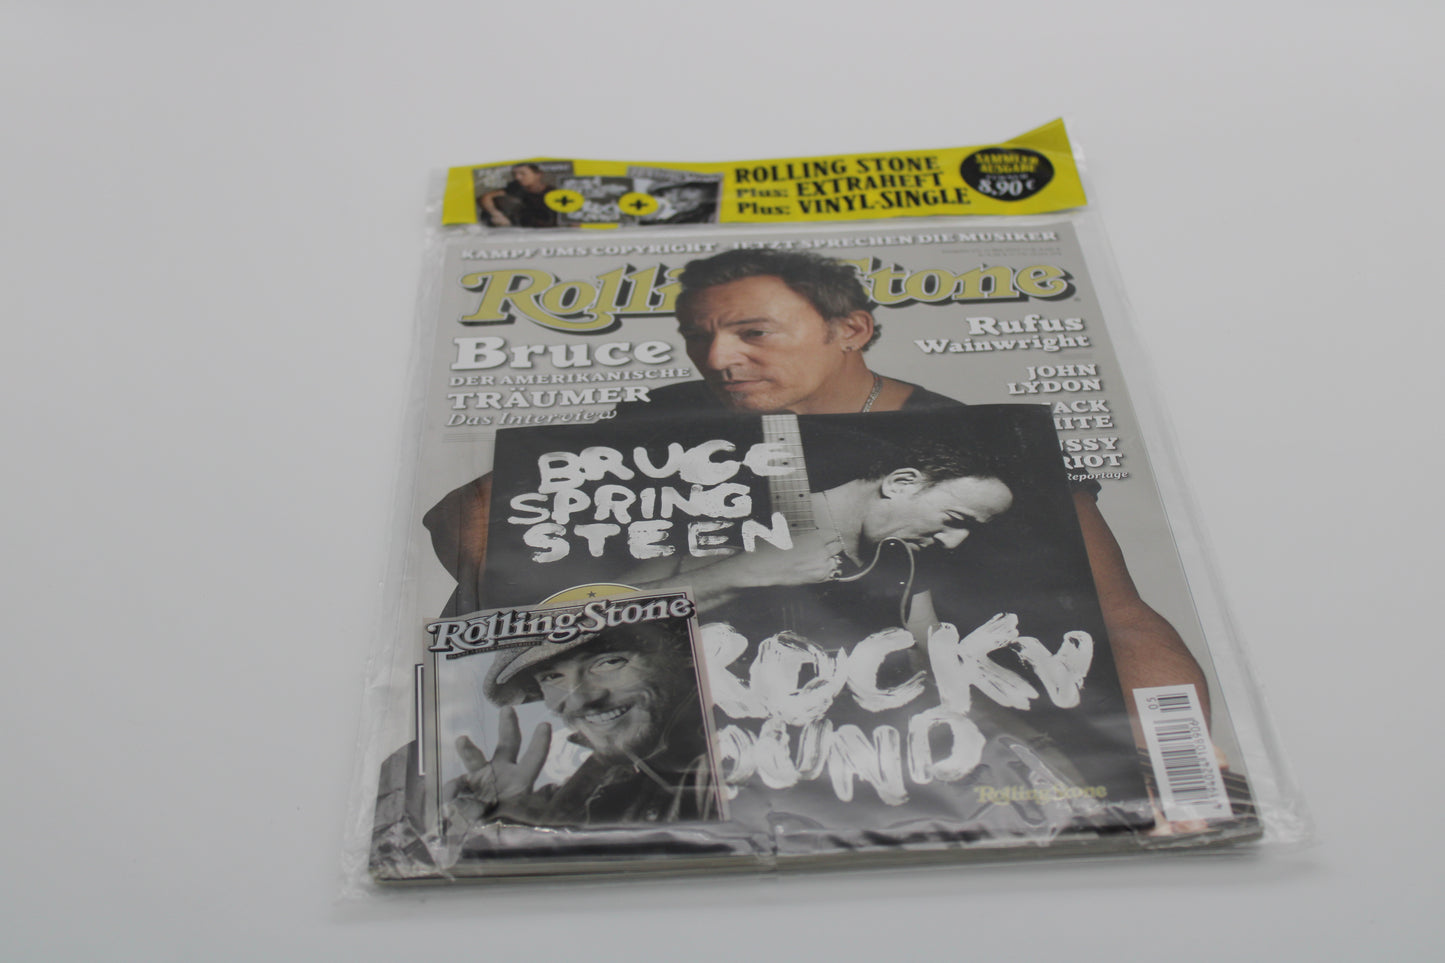 Rolling Stone Magazine Exclusive: Collectible Edition Rocky Ground 7”/45 Record - Sealed!